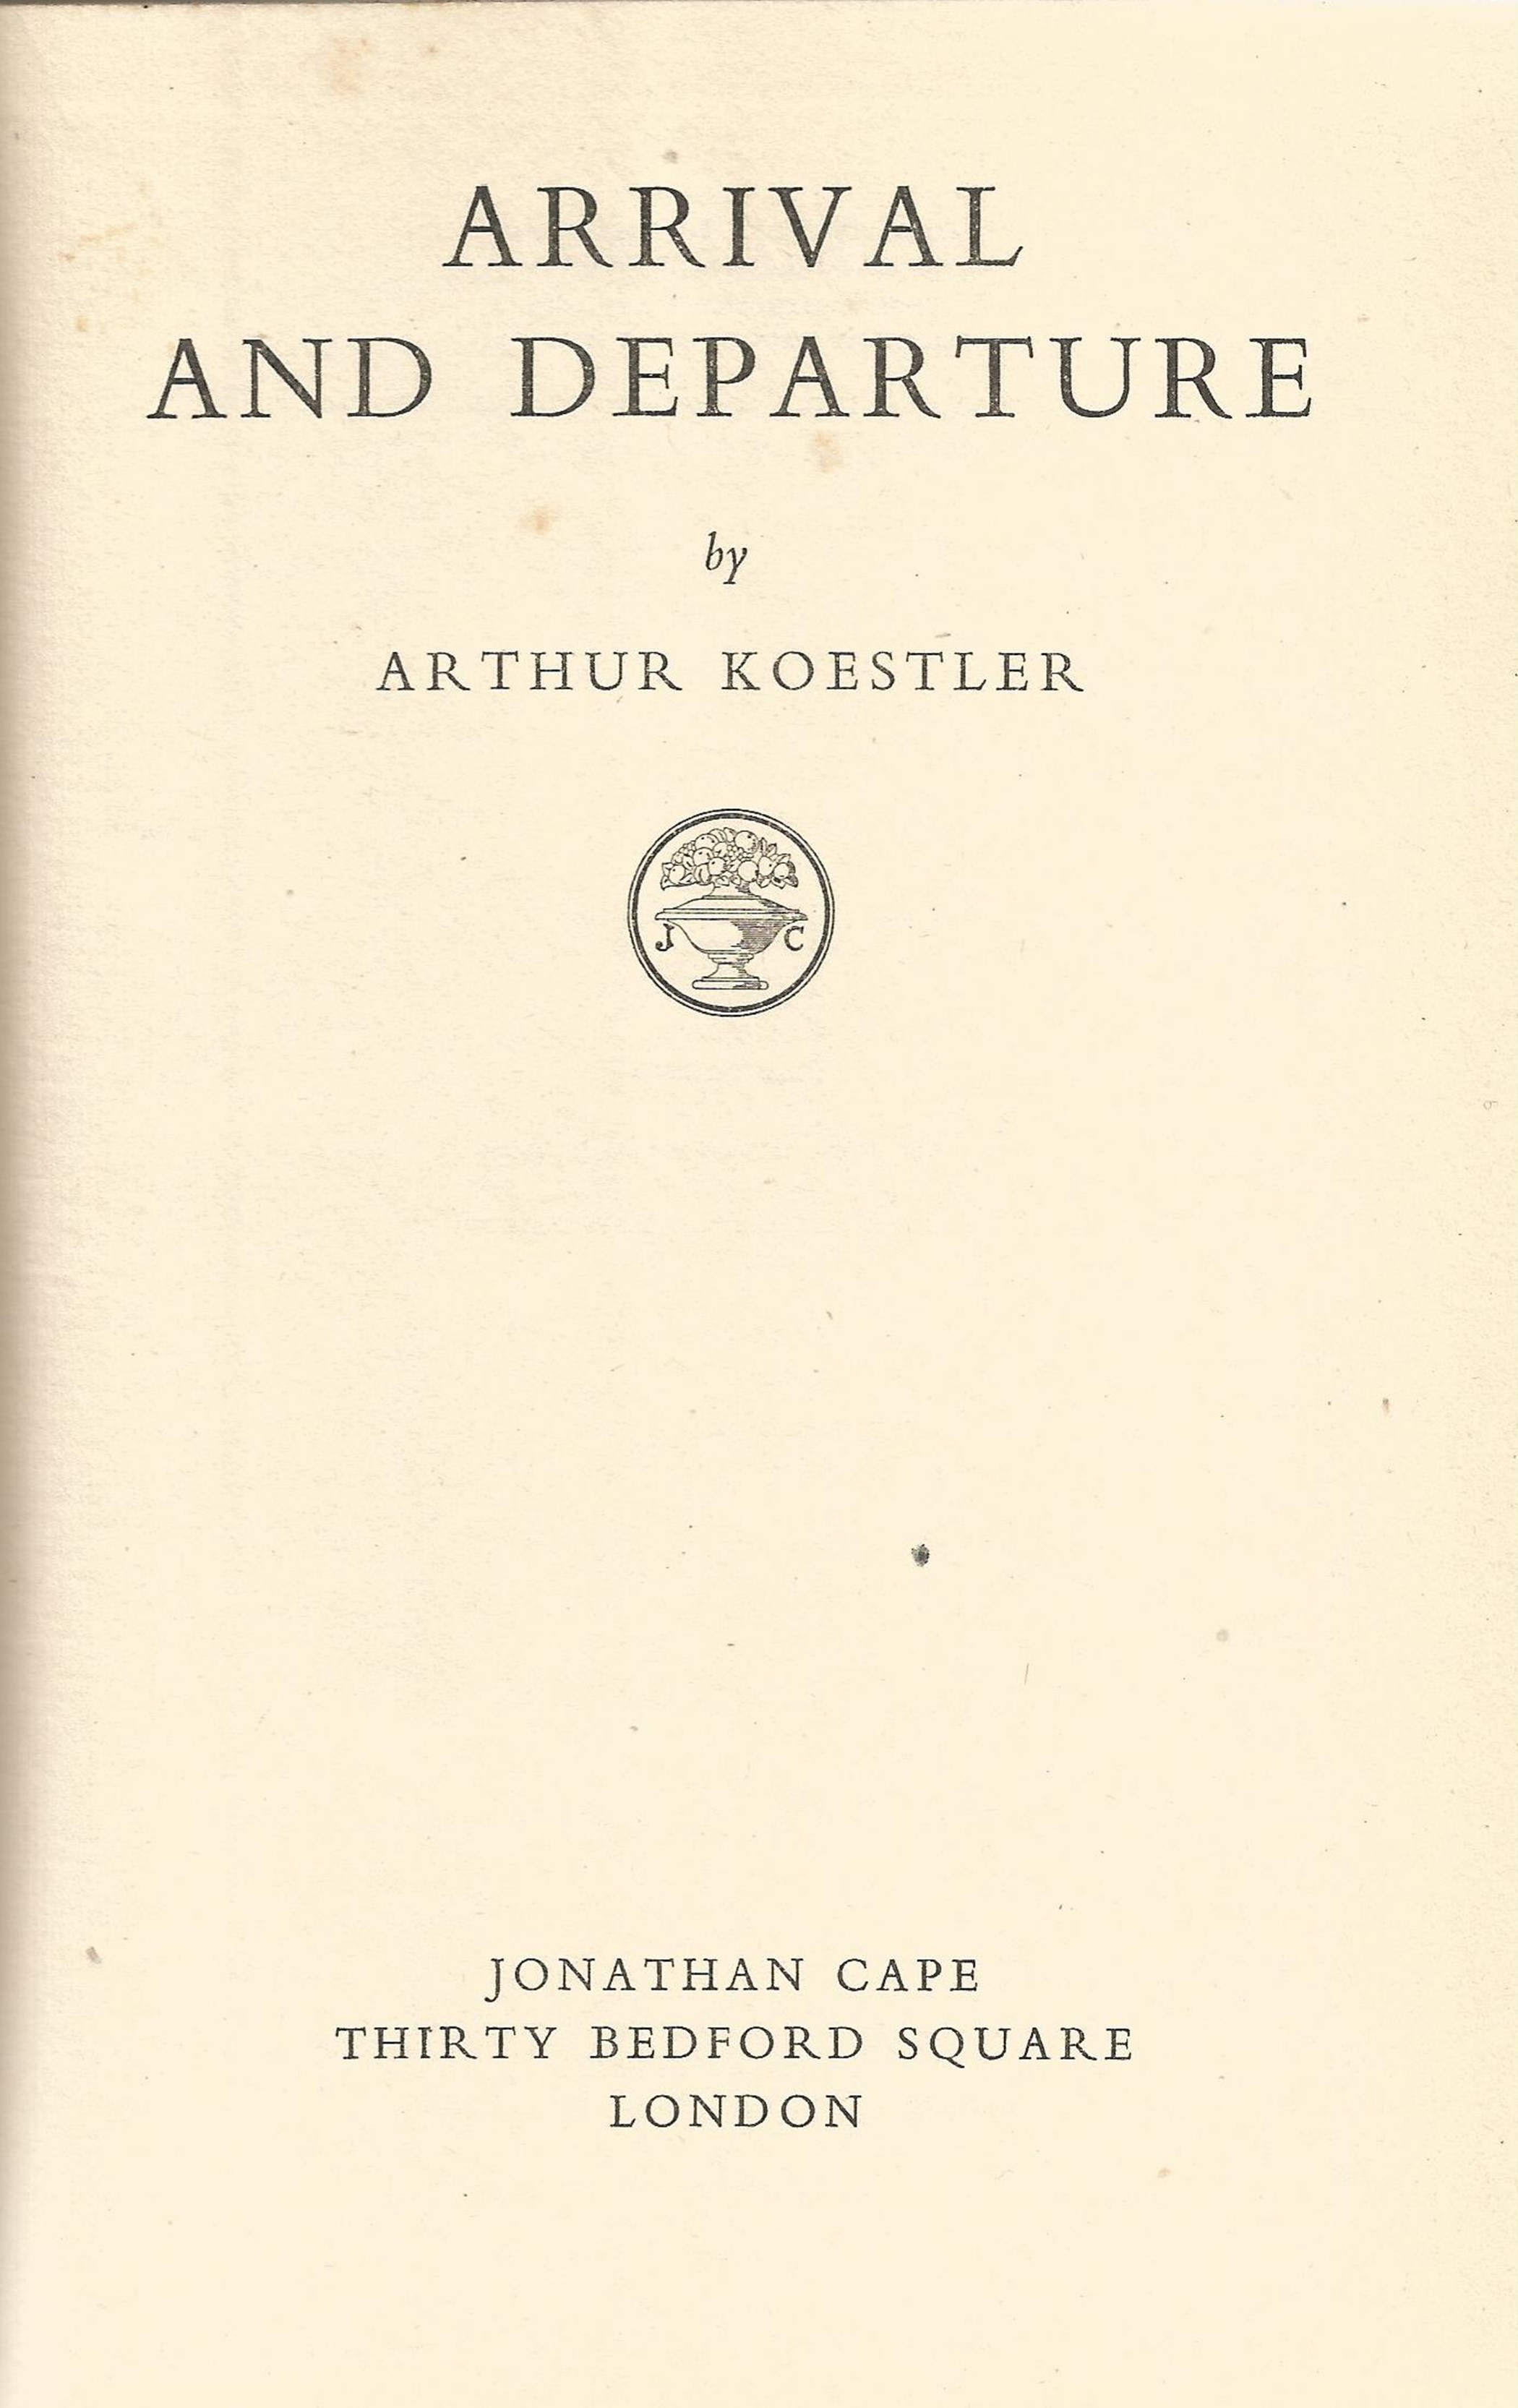 Arrival and Departure and Darkness at Noon by Arthur Koestler Hardback Books 1945 published by - Image 2 of 5